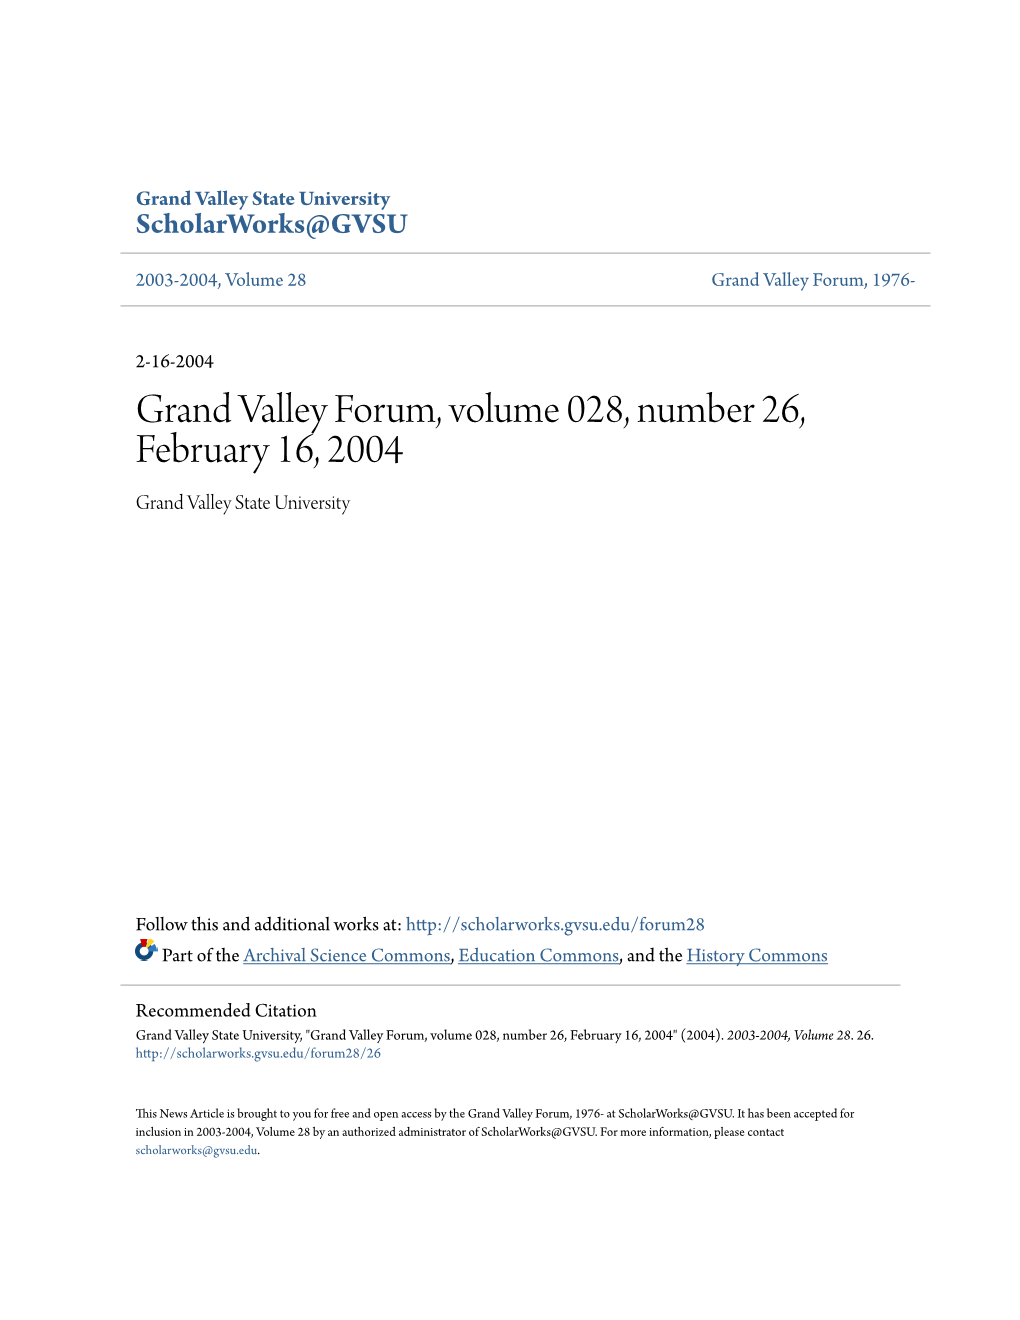 Grand Valley Forum, Volume 028, Number 26, February 16, 2004 Grand Valley State University